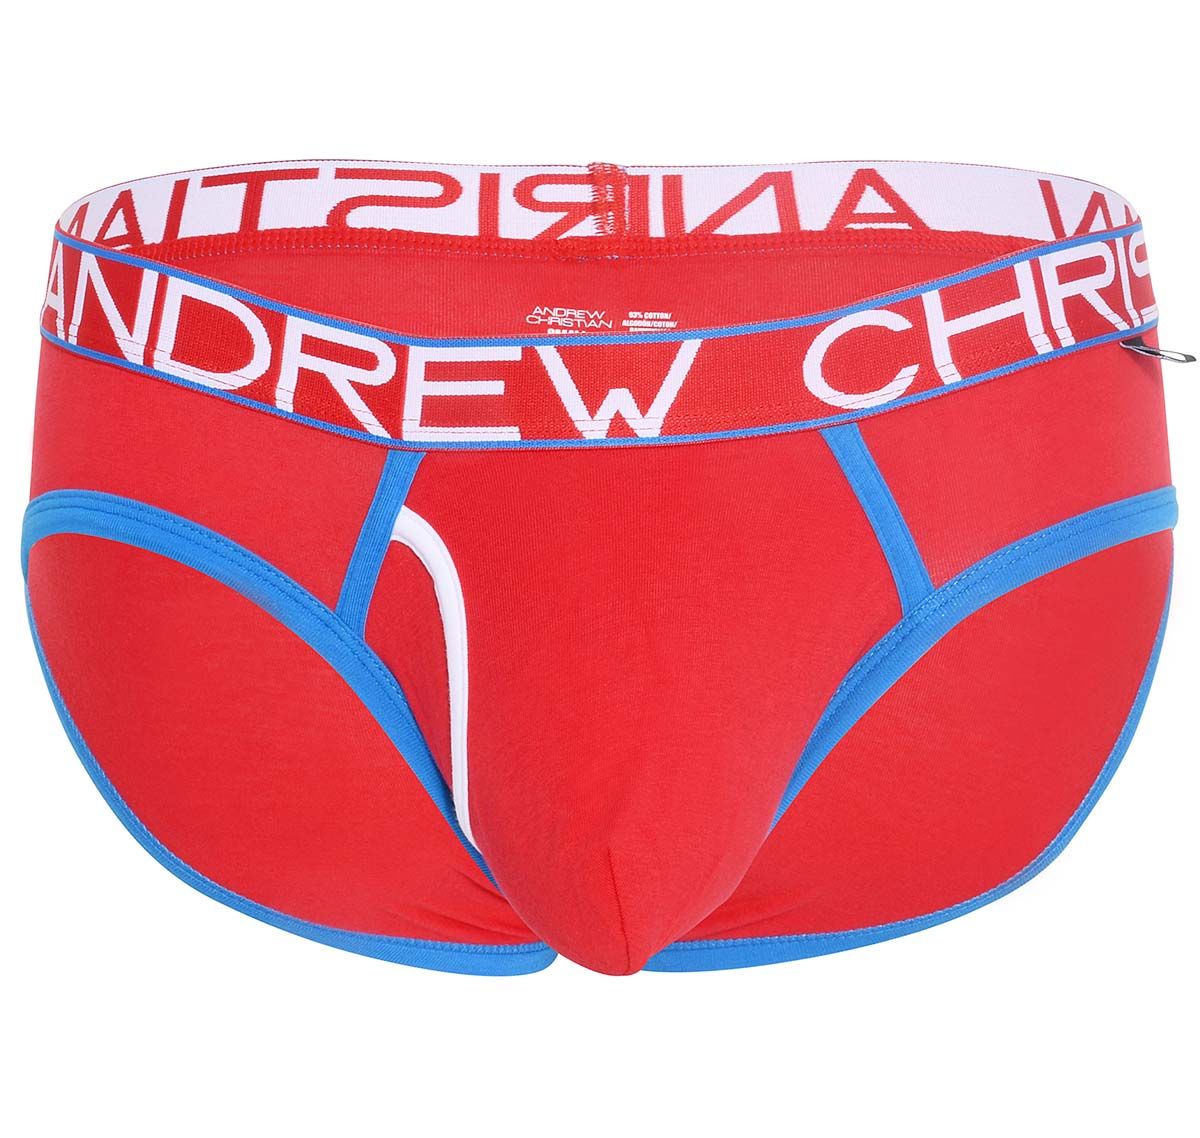 Andrew Christian Brief FLY TAGLESS BRIEF w/ ALMOST NAKED 92187, red